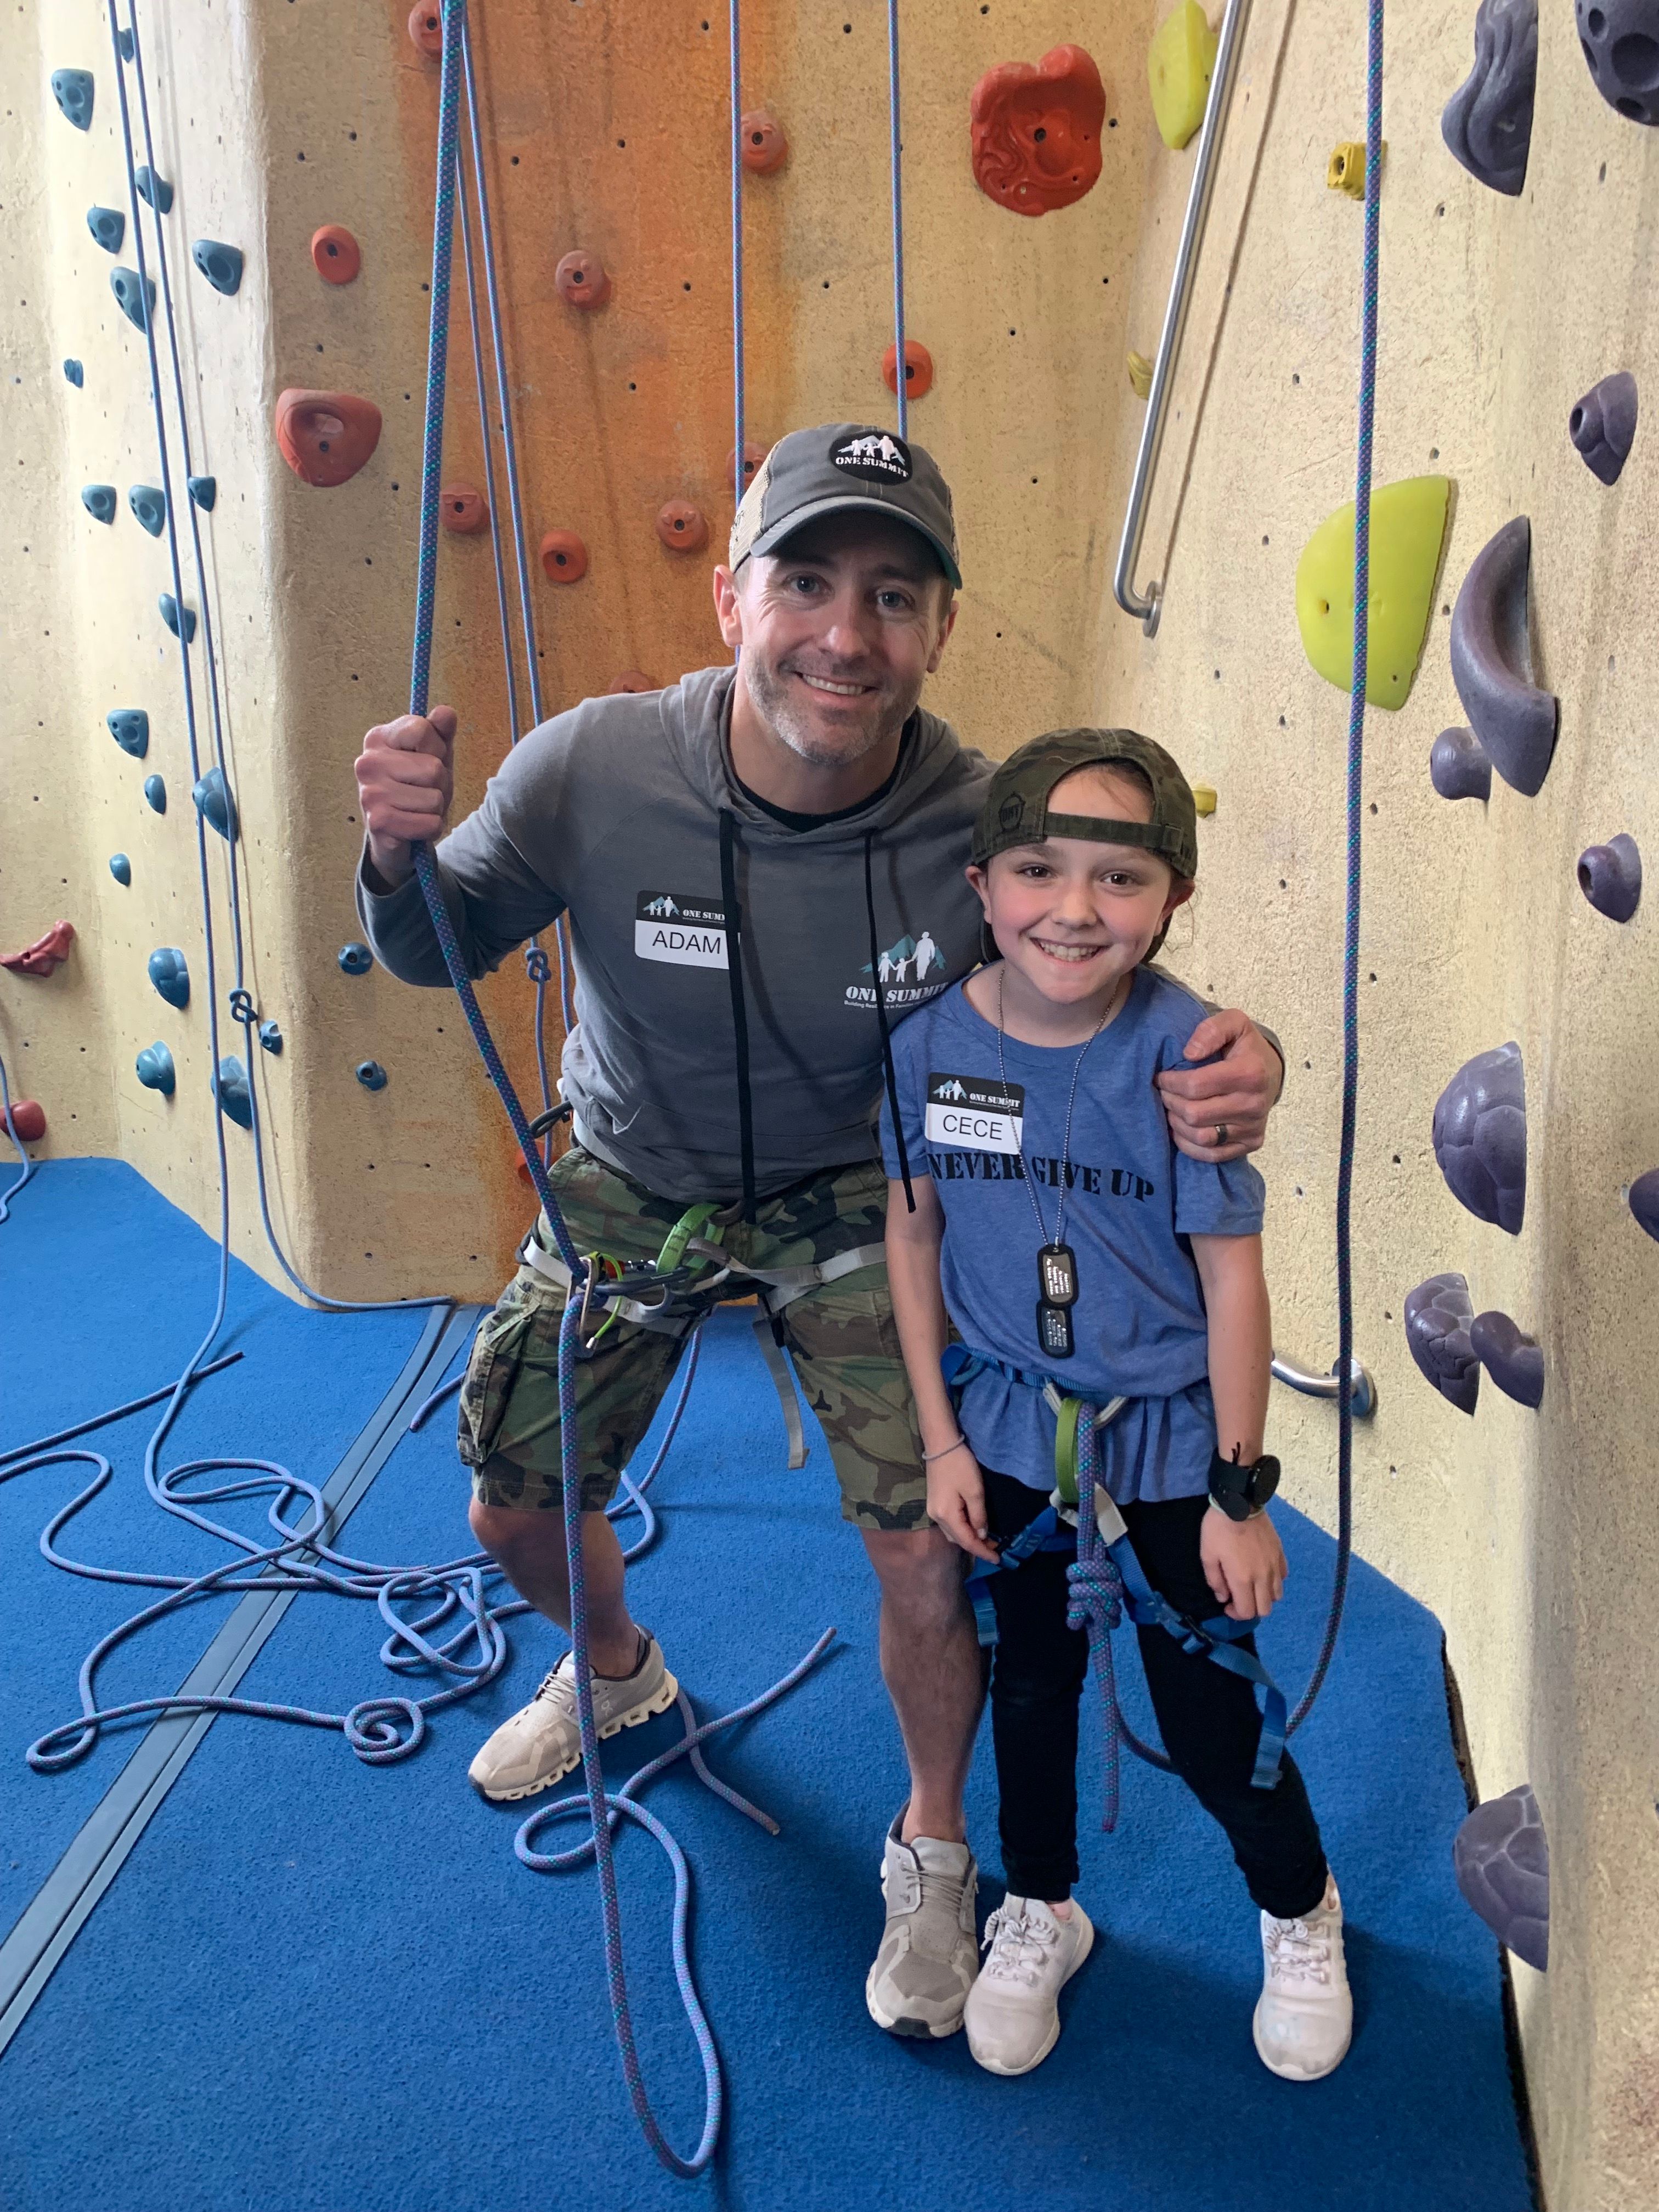 Navy SEAL with One Summit mentee after indoor rock climbing success